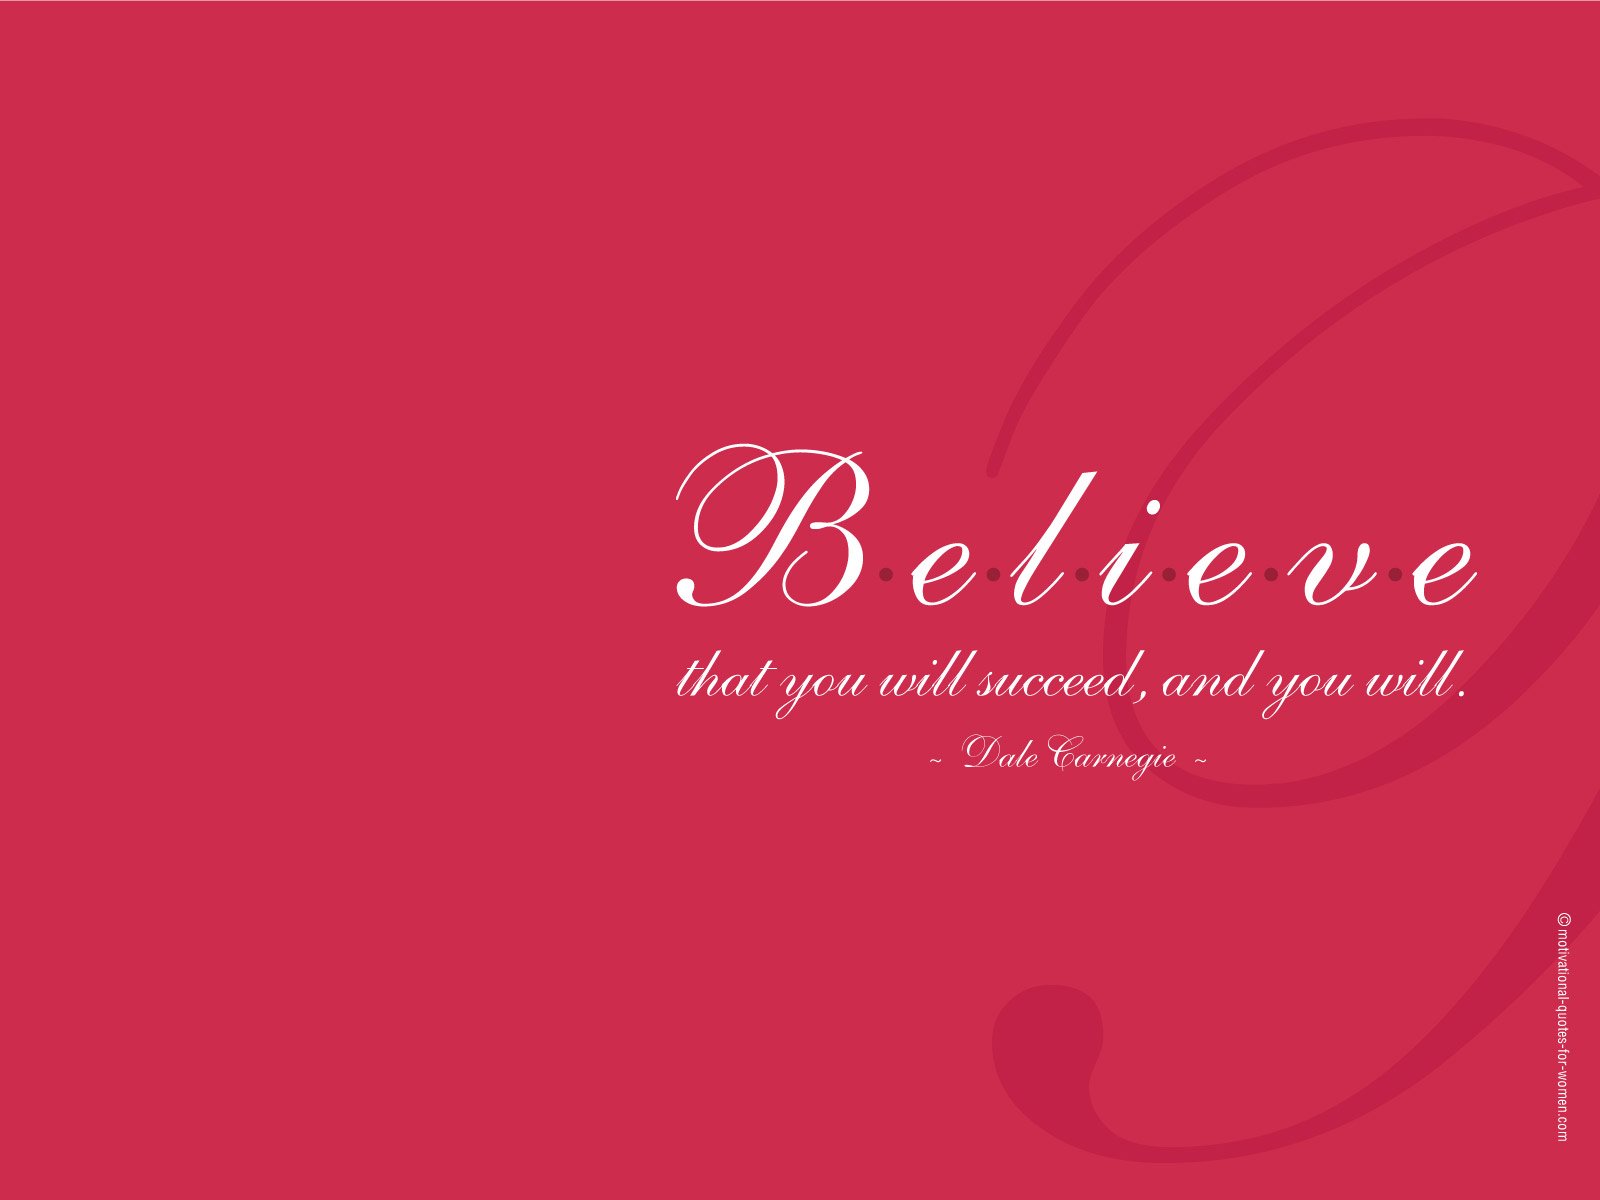 Inspirational Believe Quotes Wallpaper 3197 Inspiration   bwalles